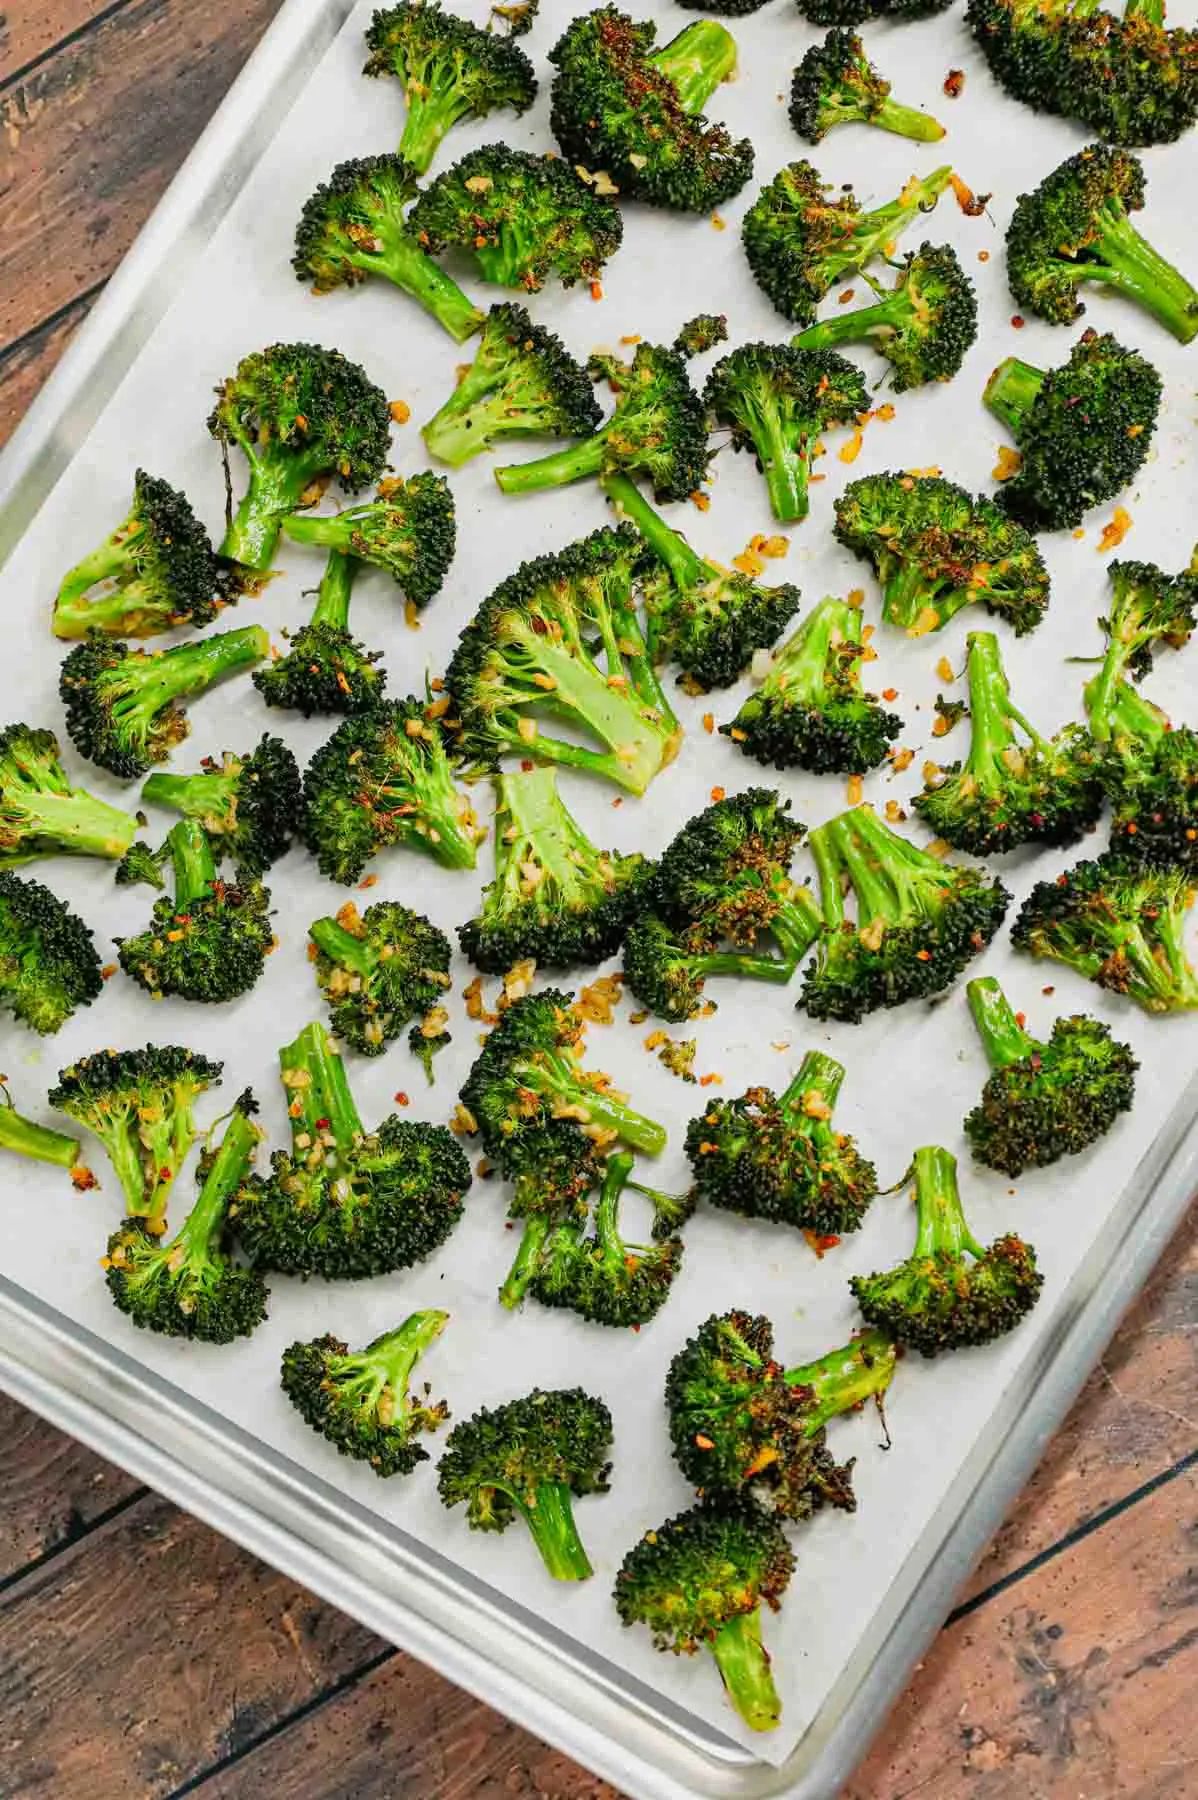 Roasted Broccoli is a simple and delicious side dish made with broccoli florets tossed in olive oil, minced garlic, salt, pepper, Italian seasoning and parmesan cheese and roasted until tender and slightly crispy.